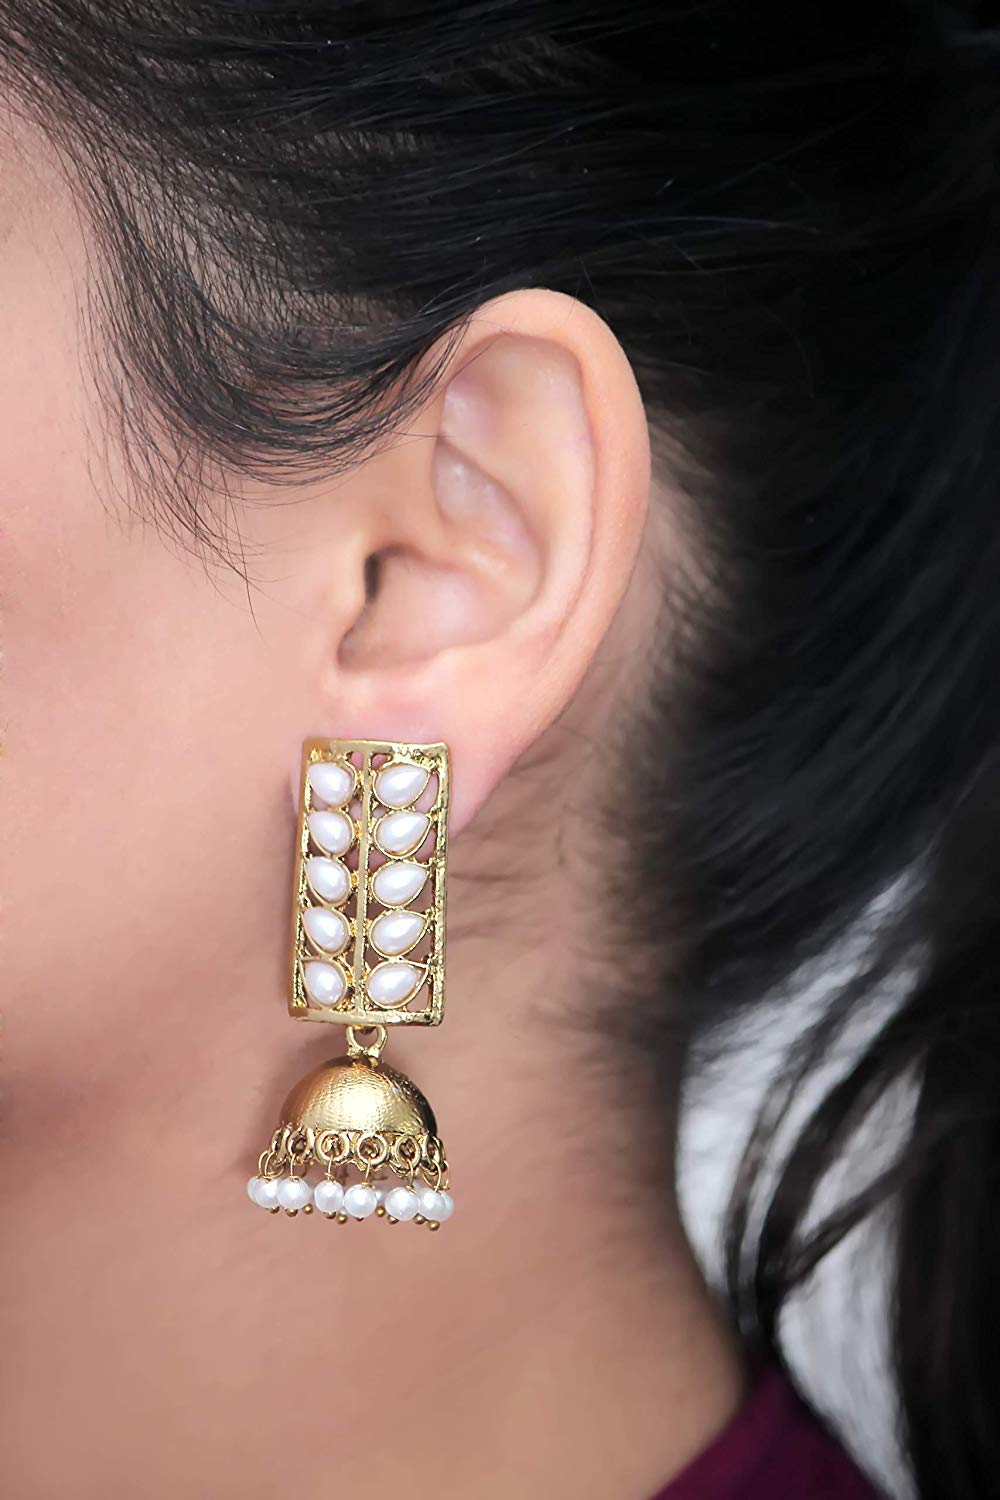 Indian Bollywood Style Big Blue Traditional Jhumka Earrings for Girls | eBay